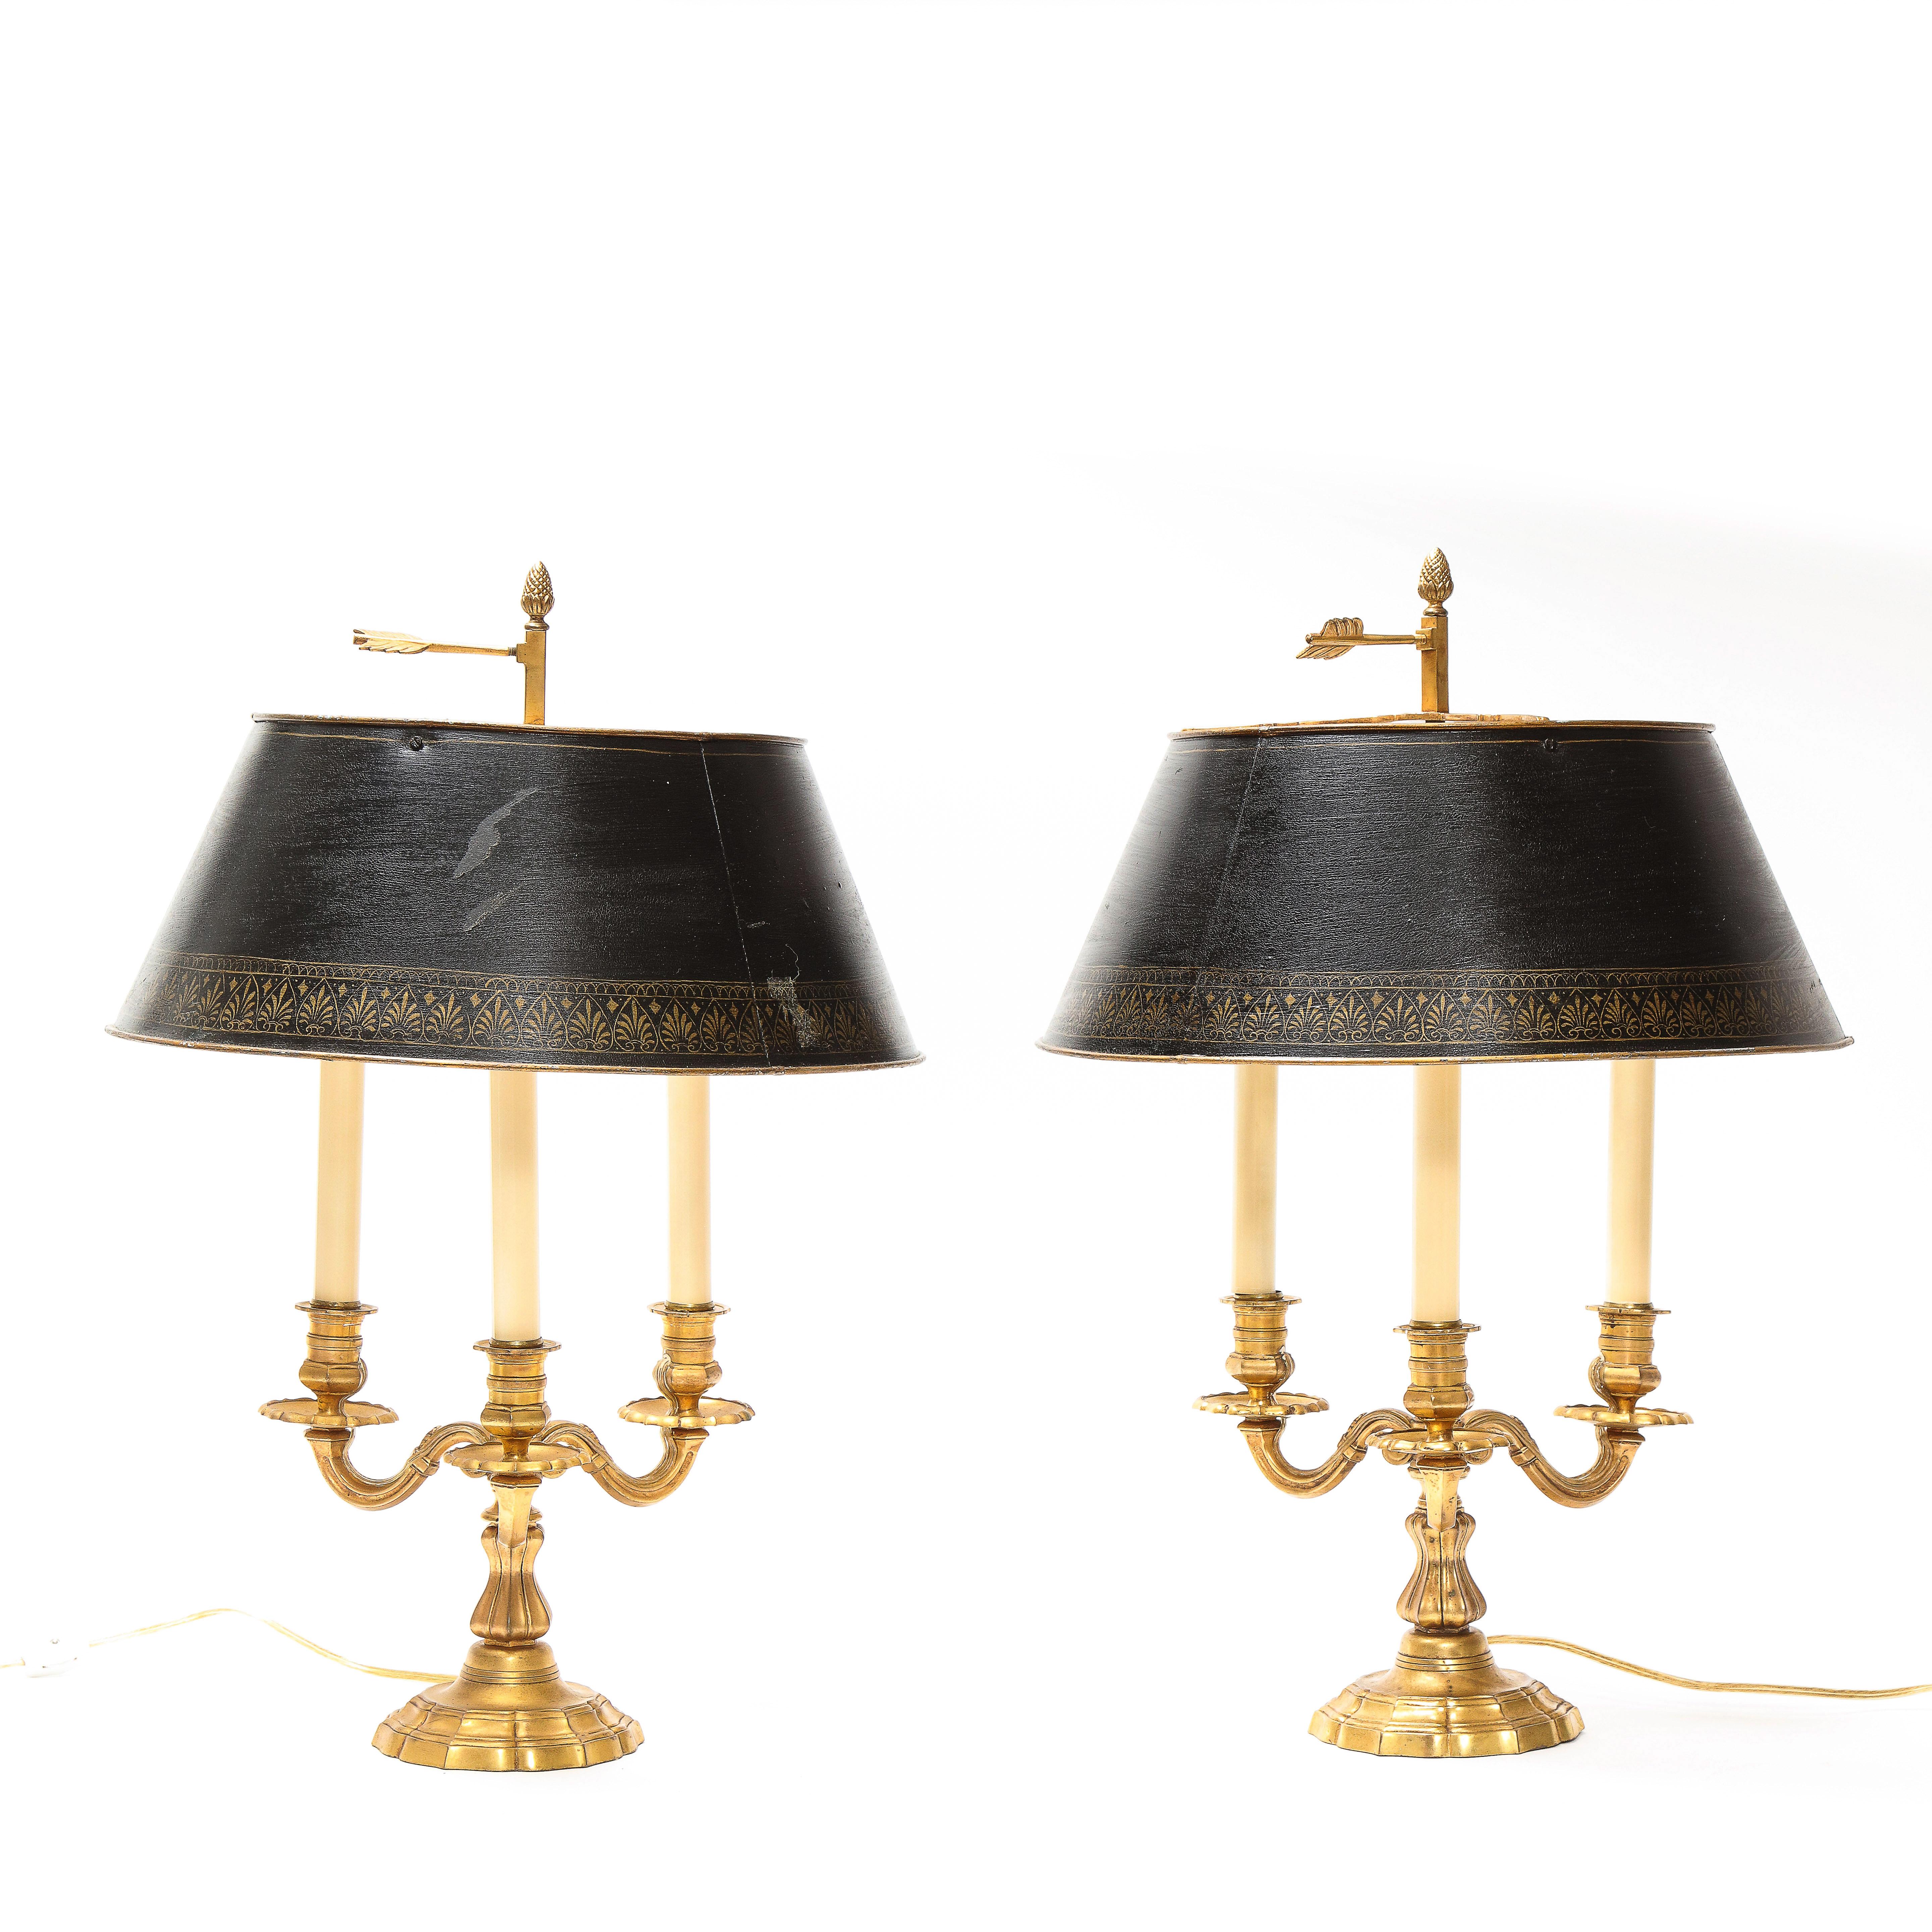 Each three arm candelabra; with painted black tin shades and gilt bronze finials, wired for electricity.

From the Collection of Mario Buatta, New York, NY.